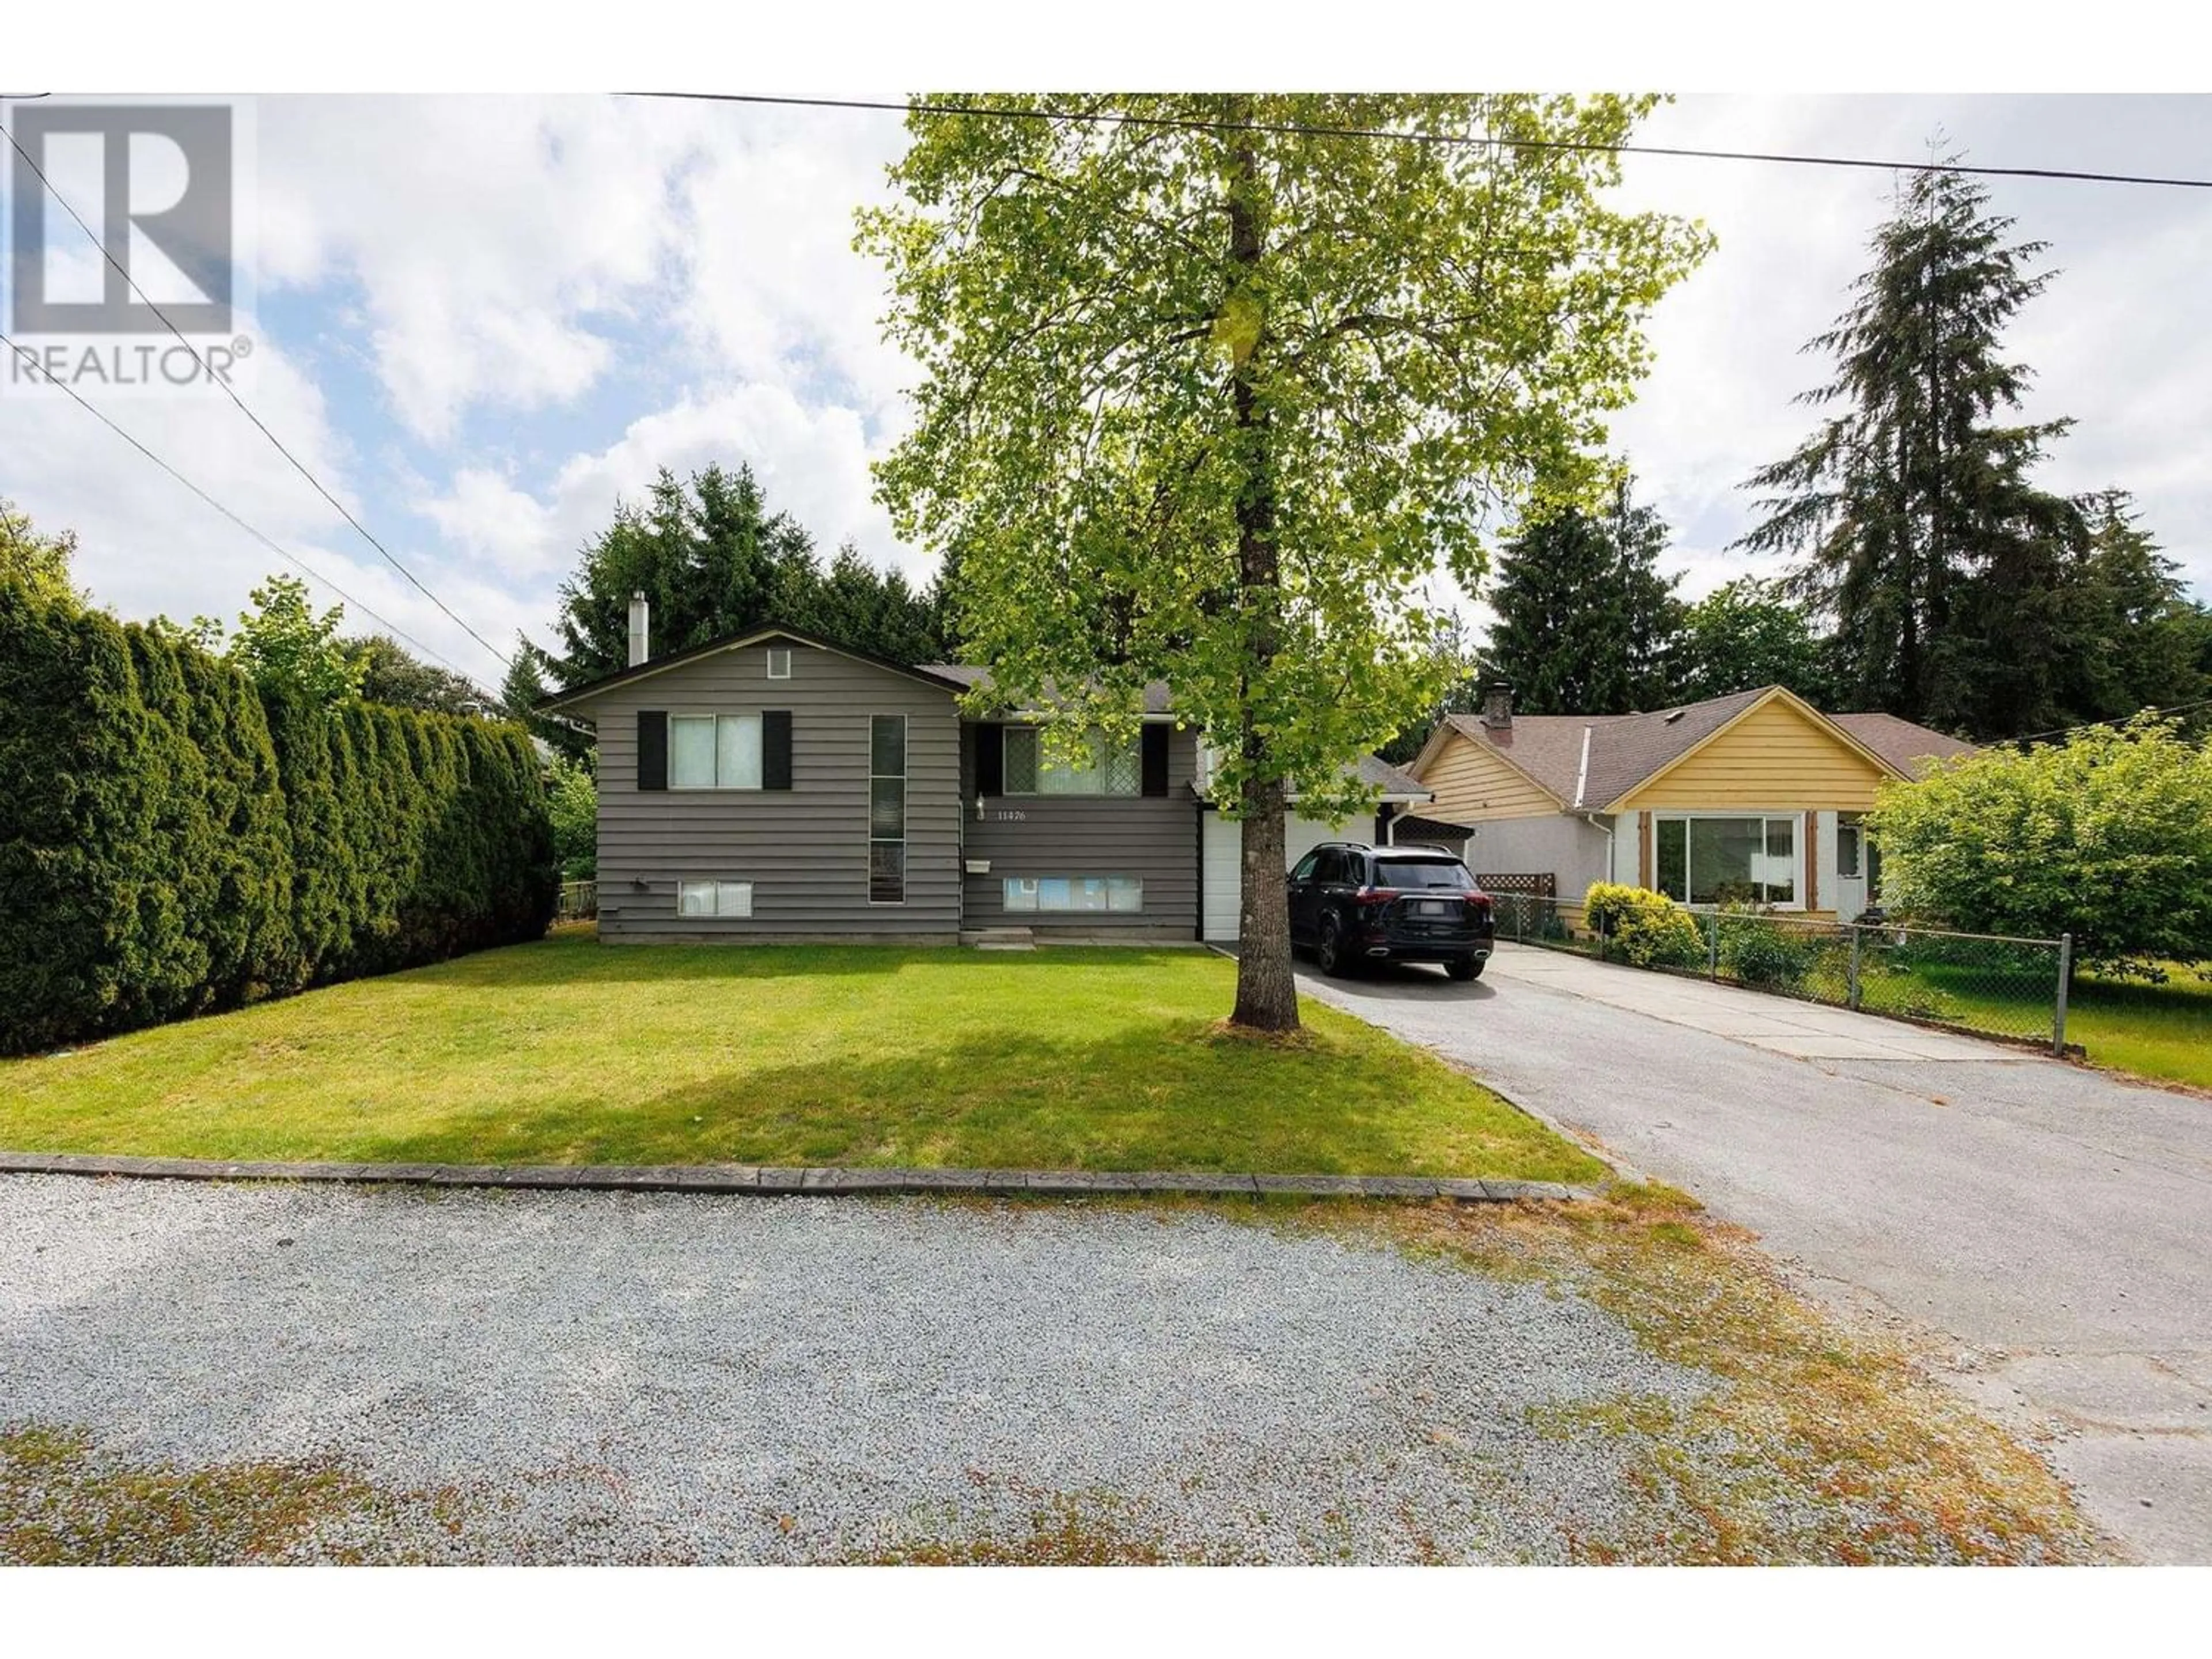 Frontside or backside of a home for 11476 BARCLAY STREET, Maple Ridge British Columbia V2X1S6